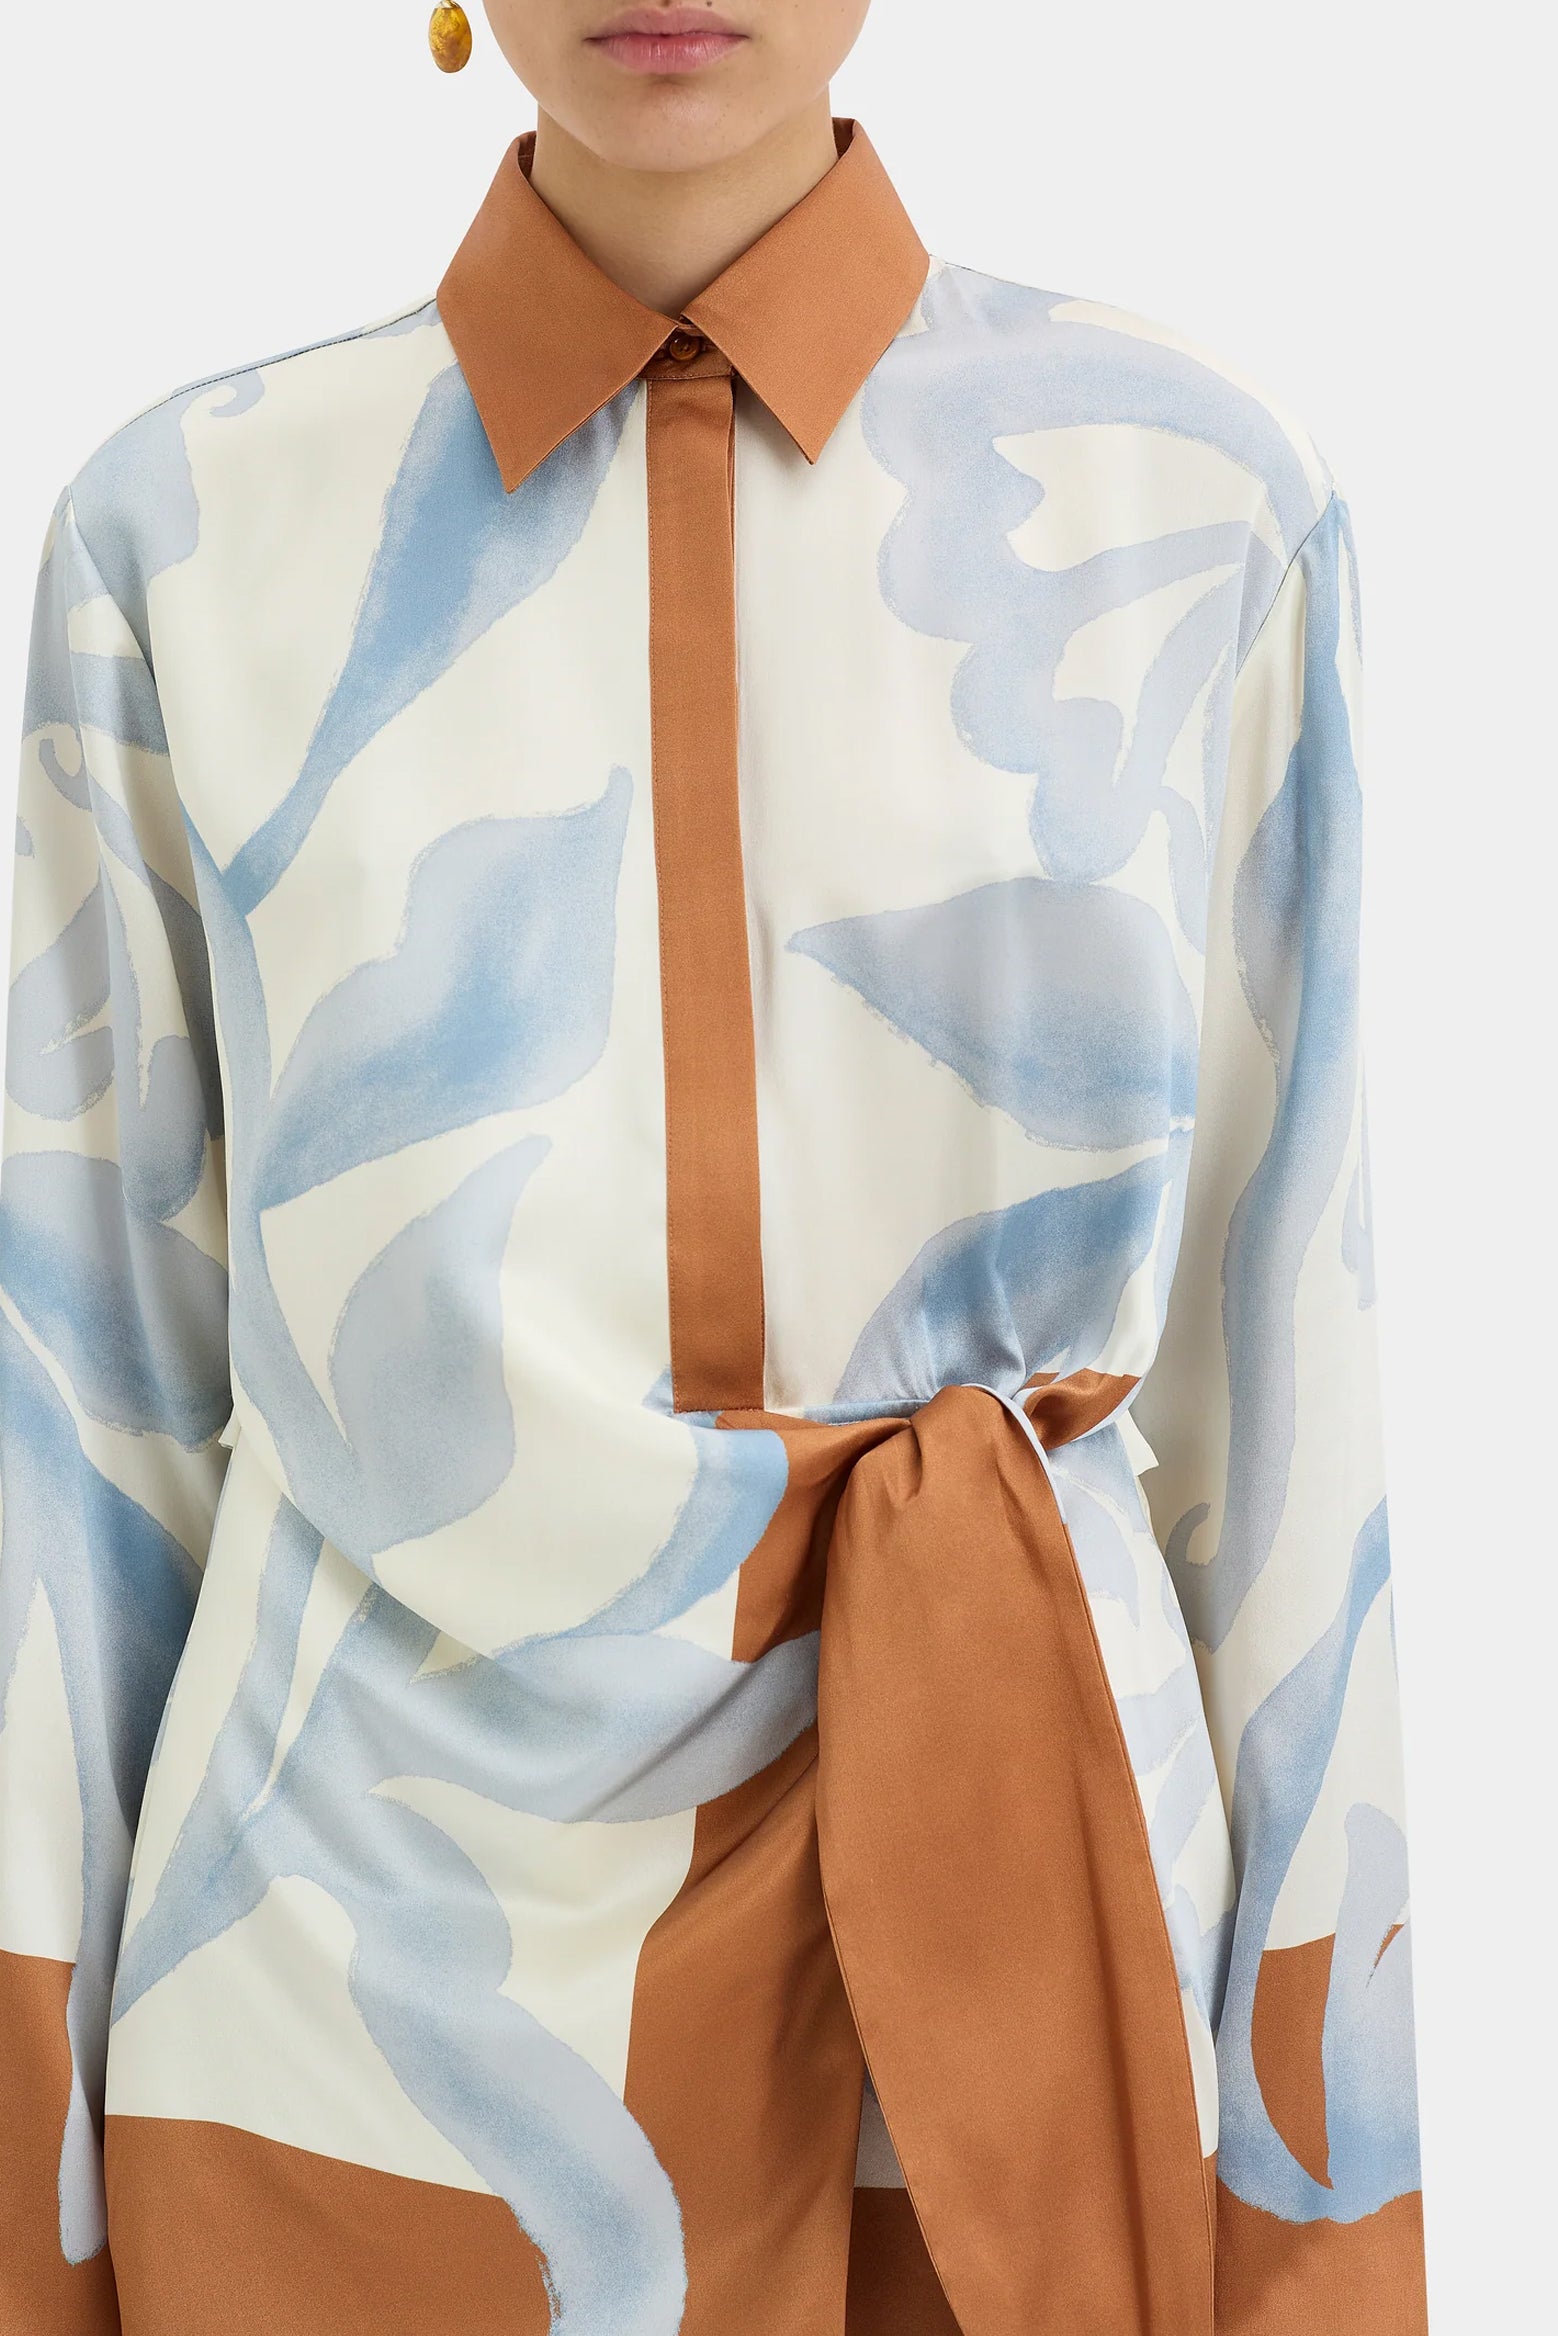 SIR Sorrento Shirtdress in Sciarpa Print available at The New Trend Australia.